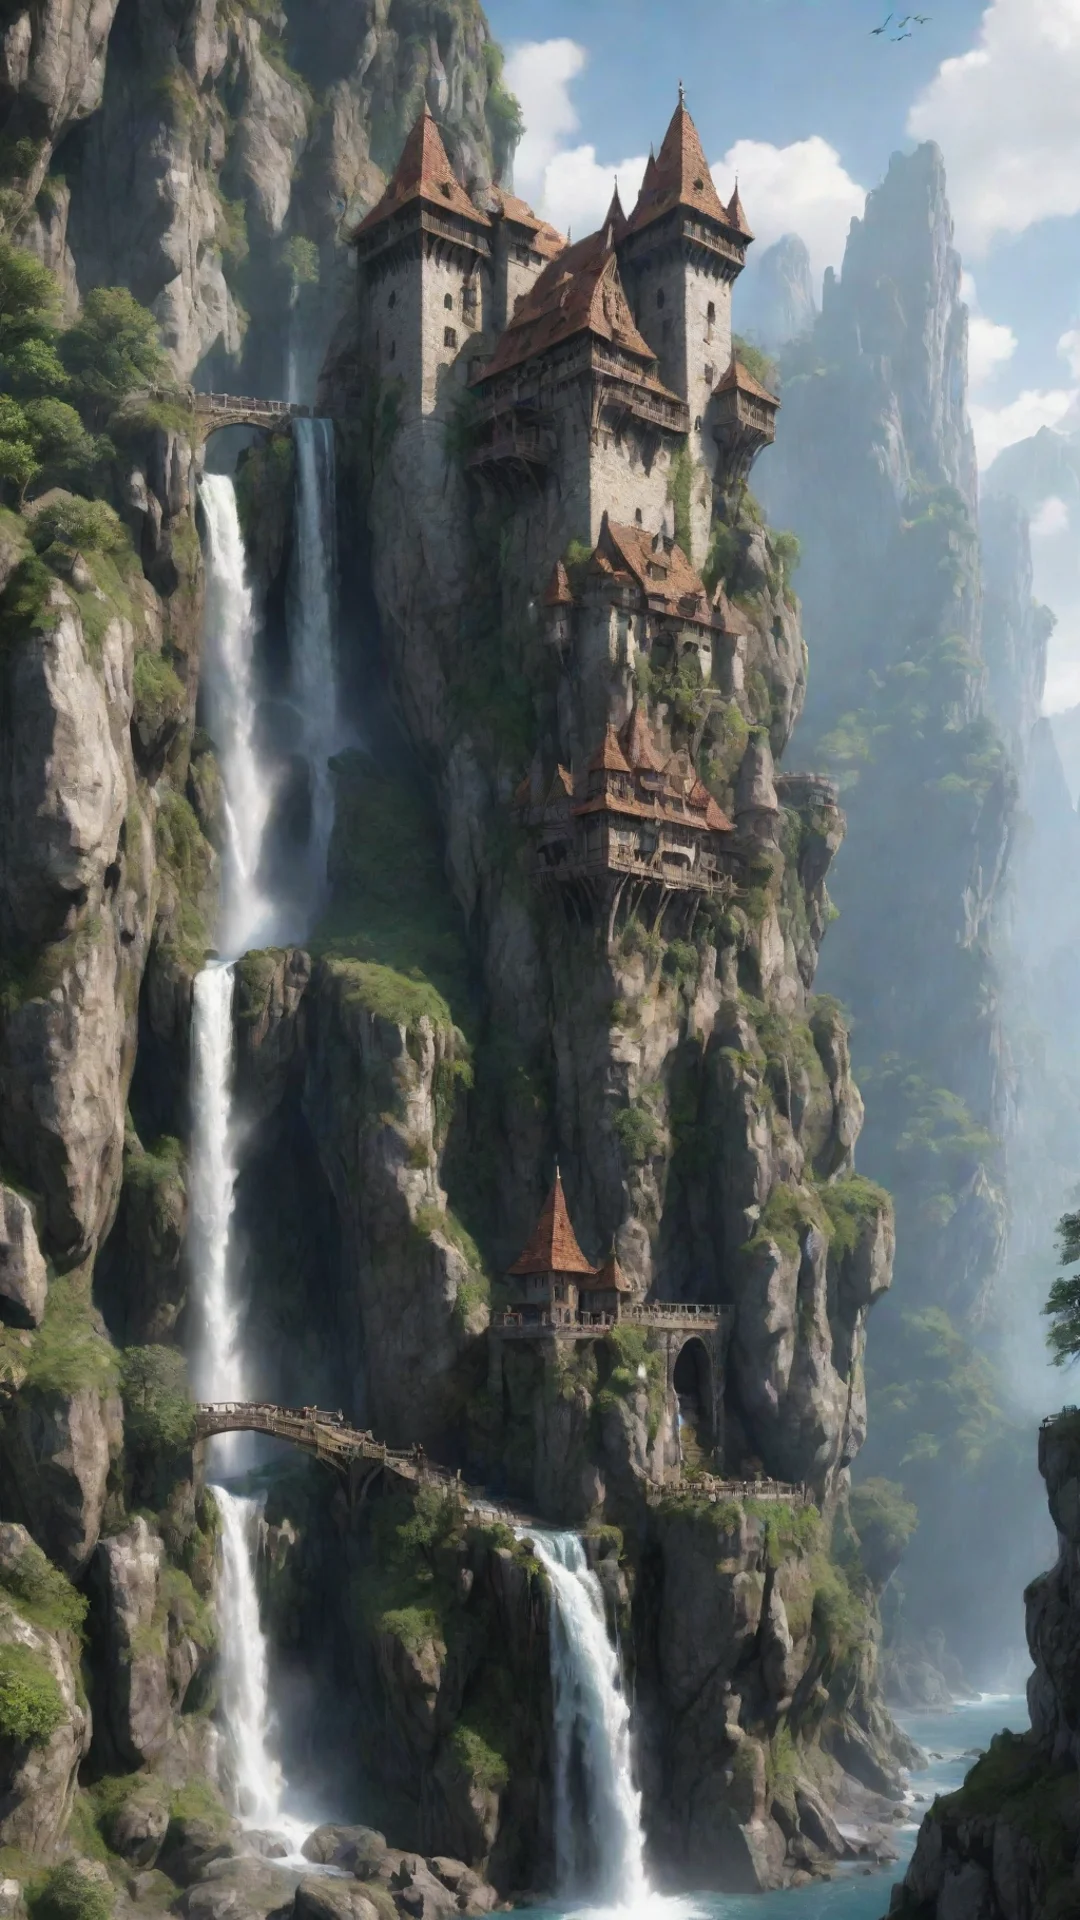 amazing elfish castle on extreme cliff overhangs caves hd detailed realistic asthetic lovely waterfalls awesome portrait 2 tall